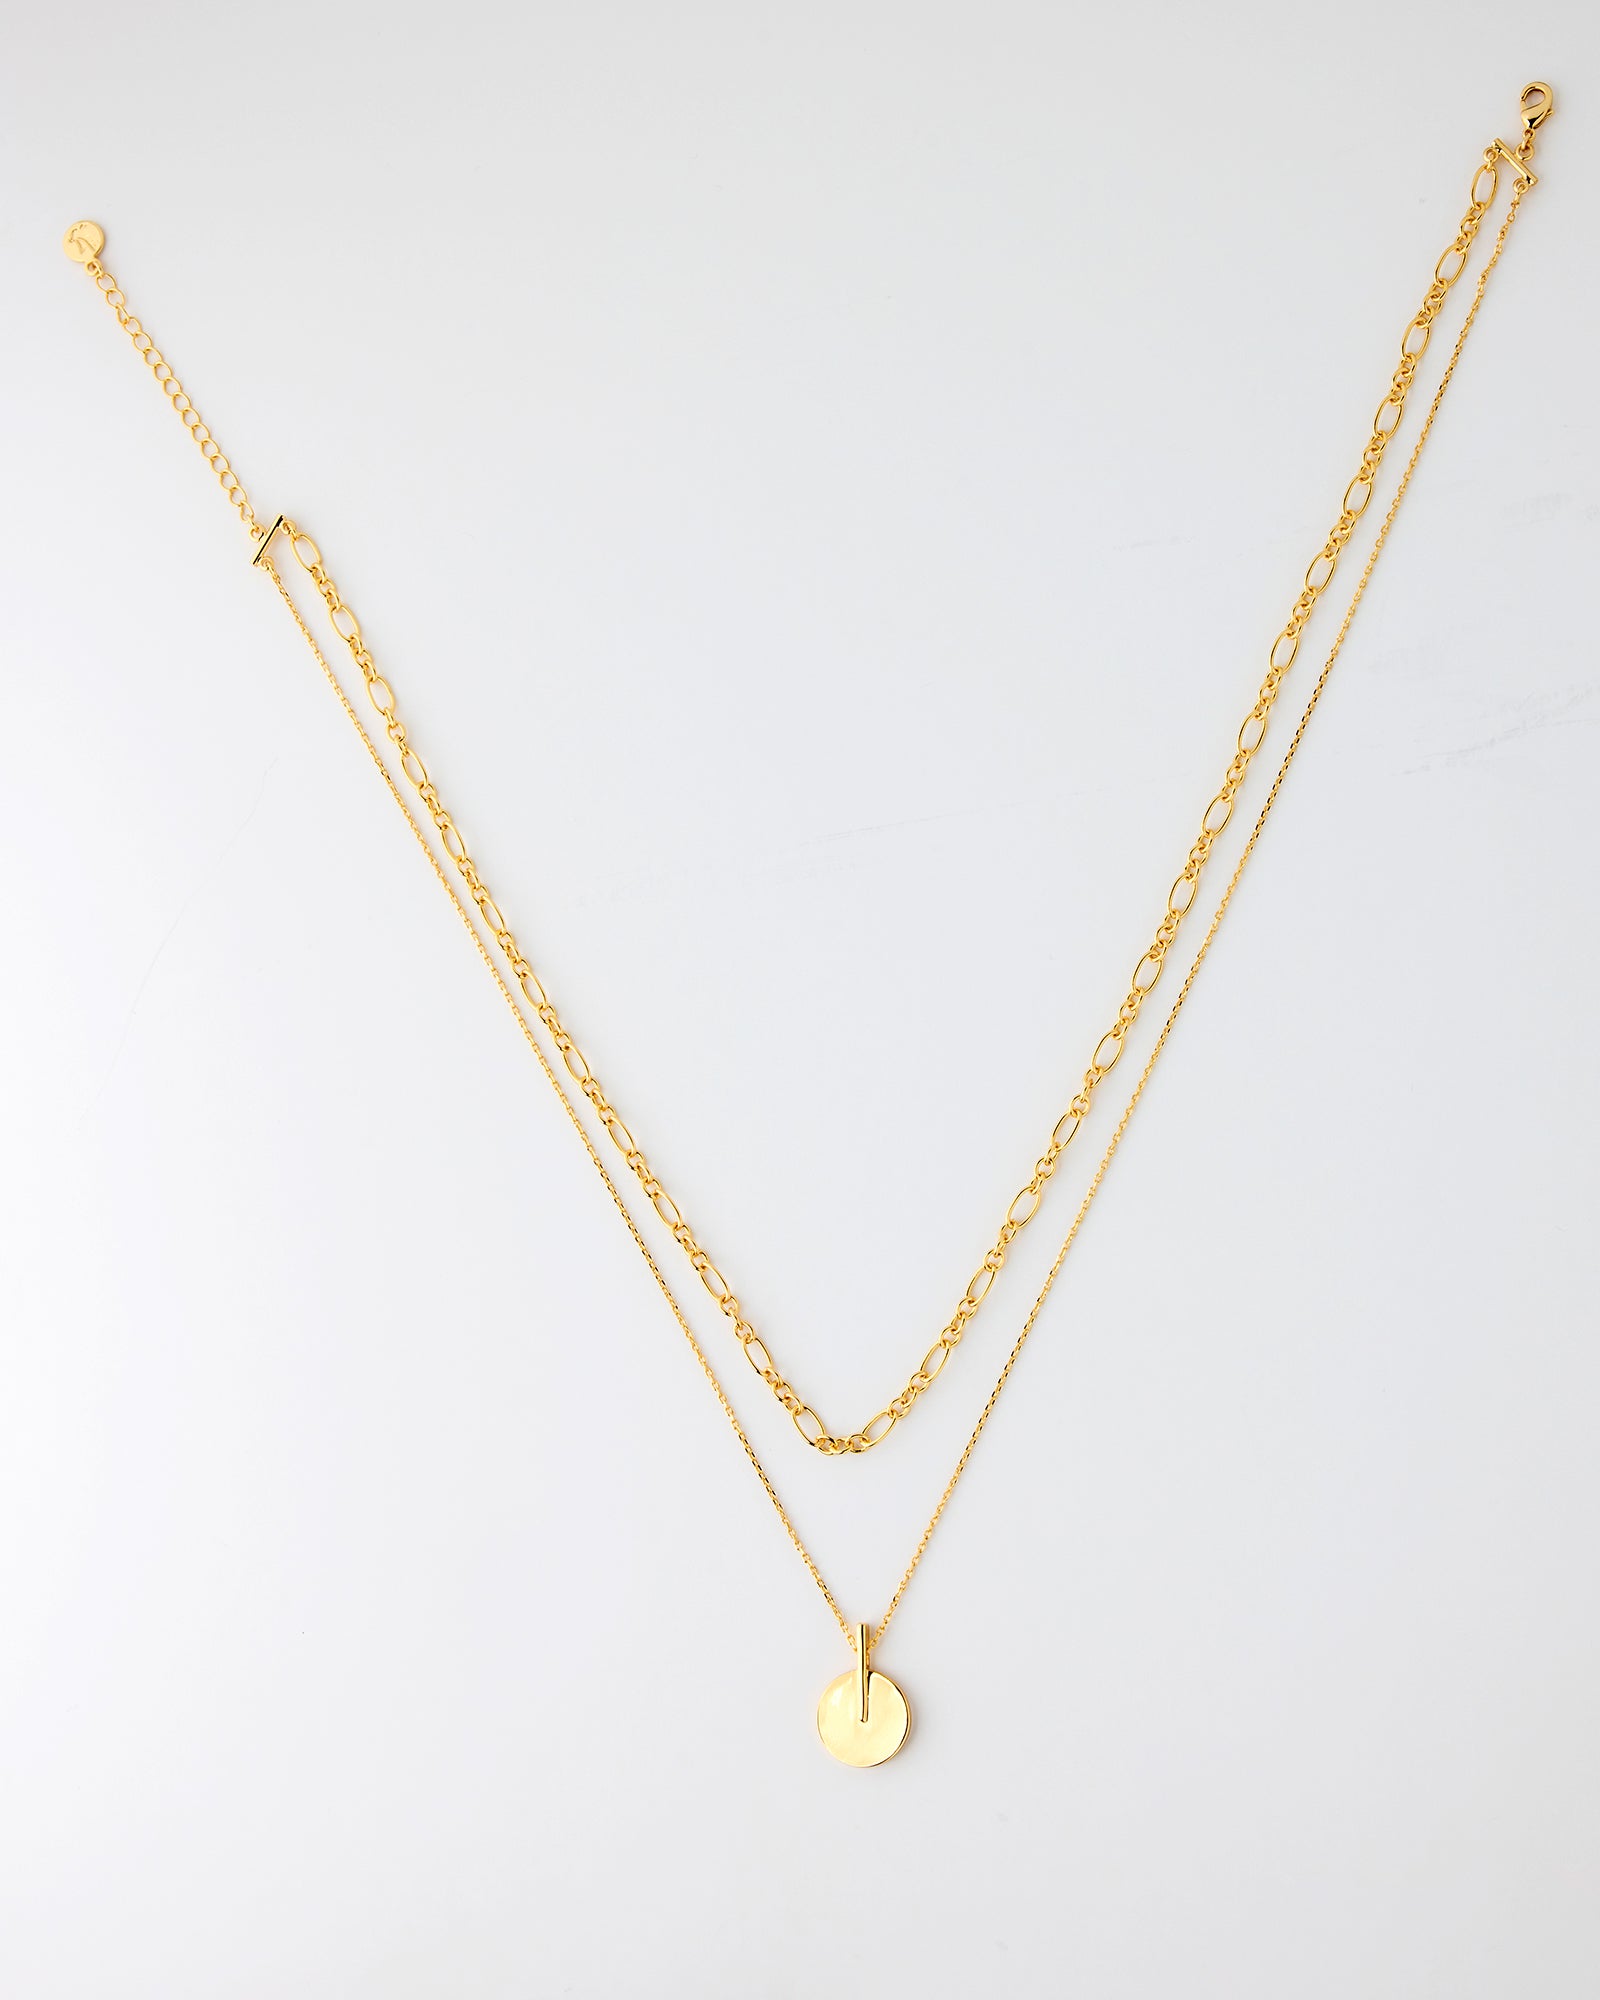 Gold chain necklaces with a circle charm on longer chain